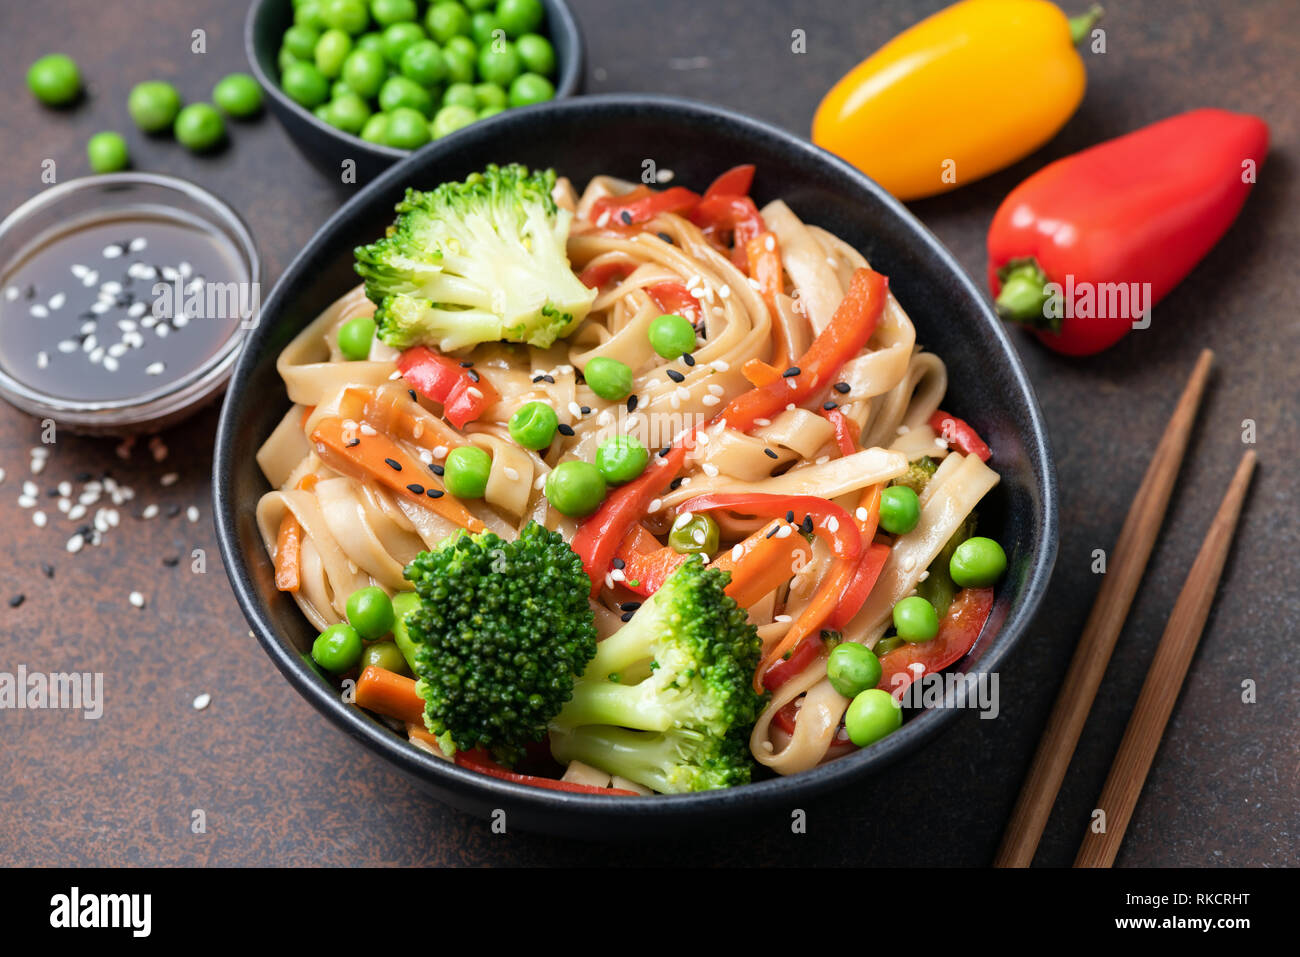 Asian noodle stir fry with vegetables in bowl. Udon noodles with broccoli, pepper, carrot and green peas Stock Photo